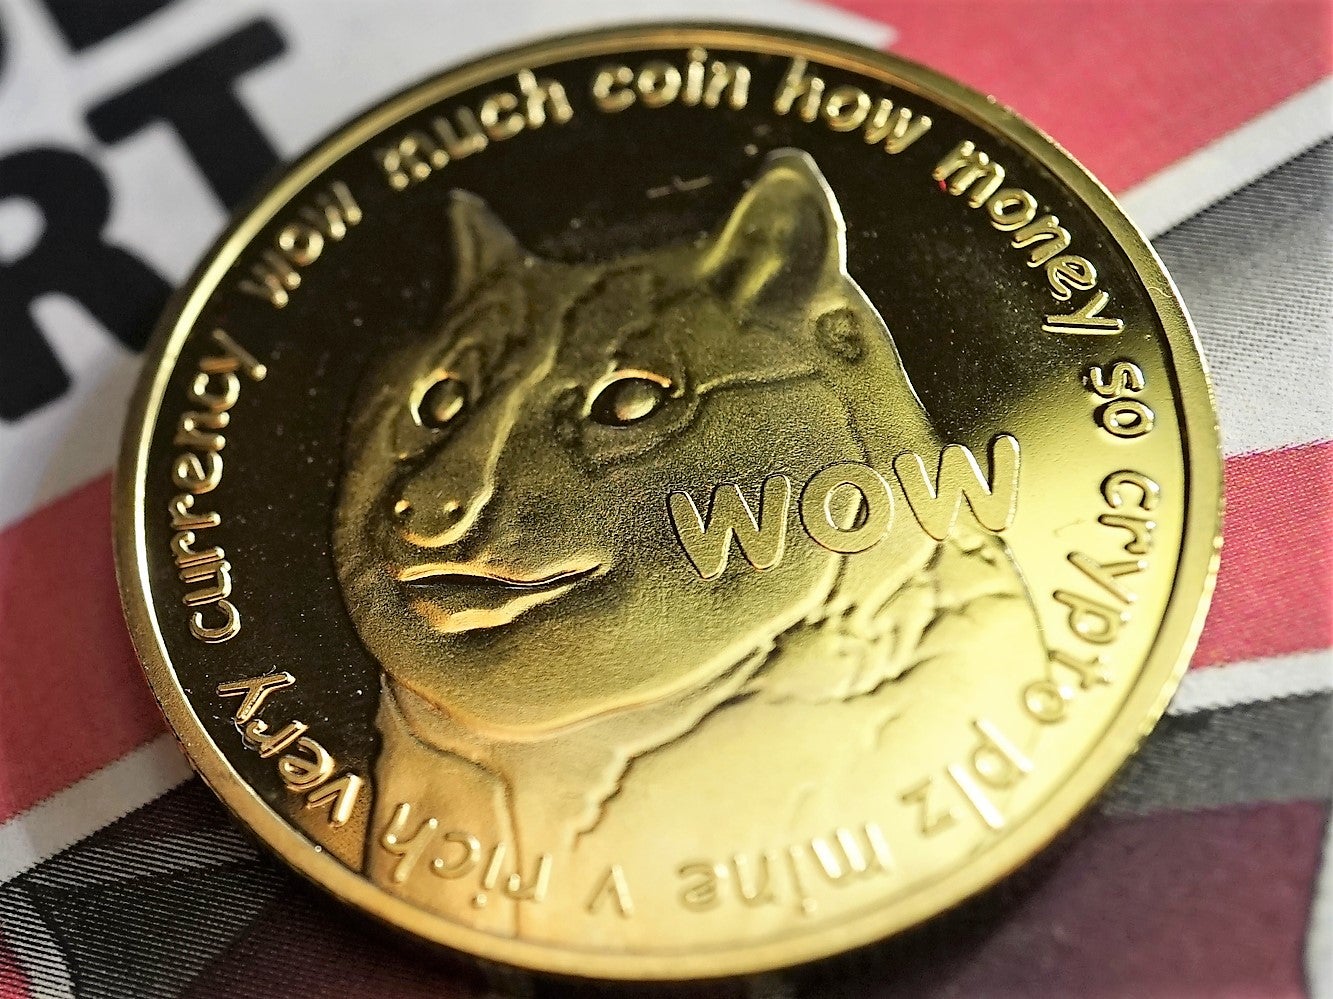 Dogecoin is trading at yearly lows in June 2022 after its price crashed by more than 90 per cent from its peak